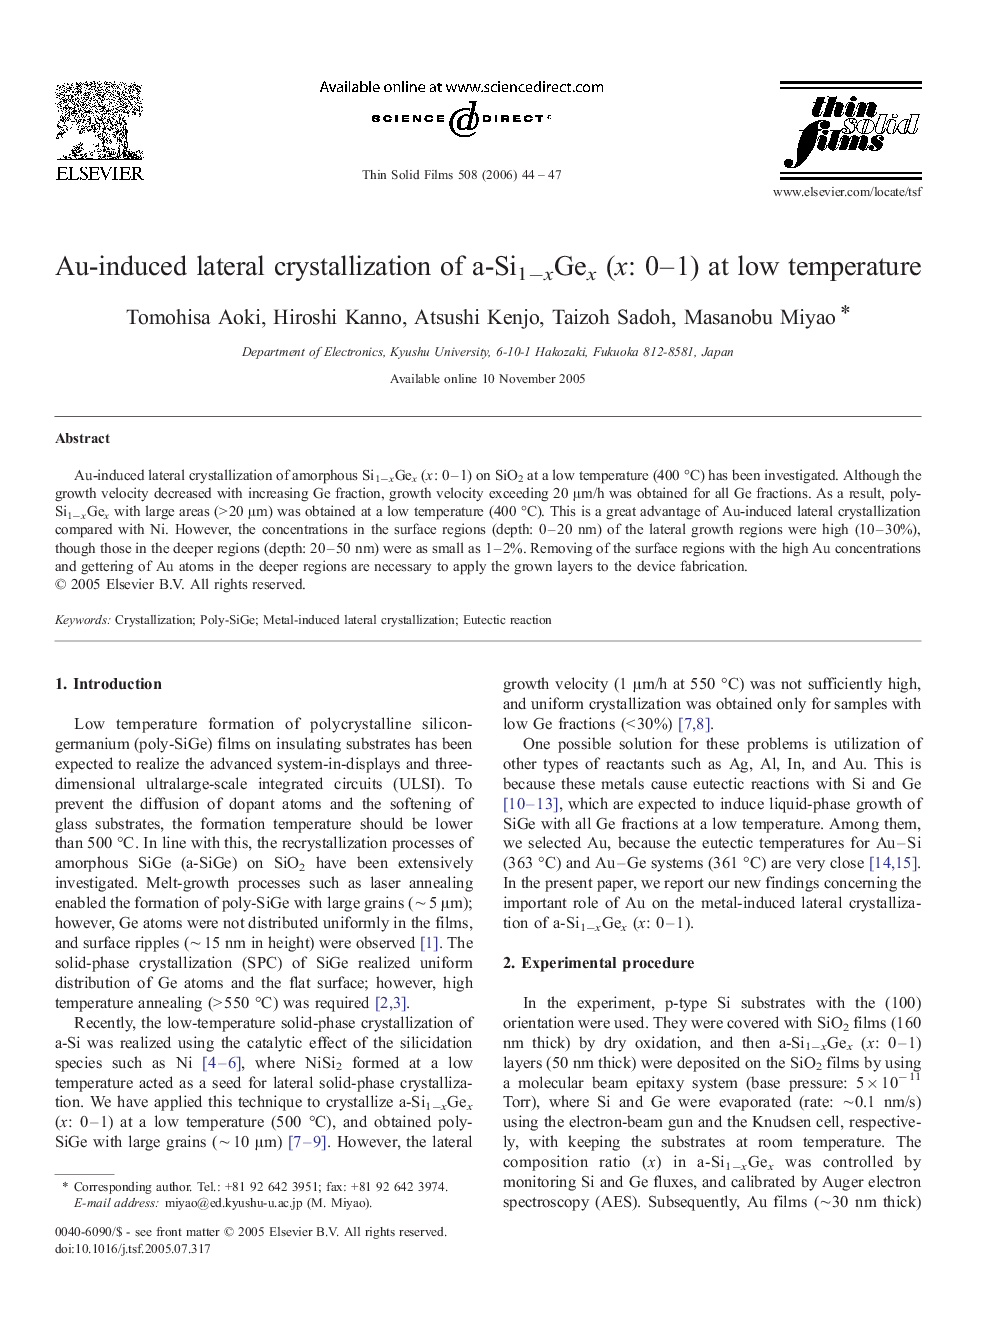 Au-induced lateral crystallization of a-Si1âxGex (x: 0-1) at low temperature